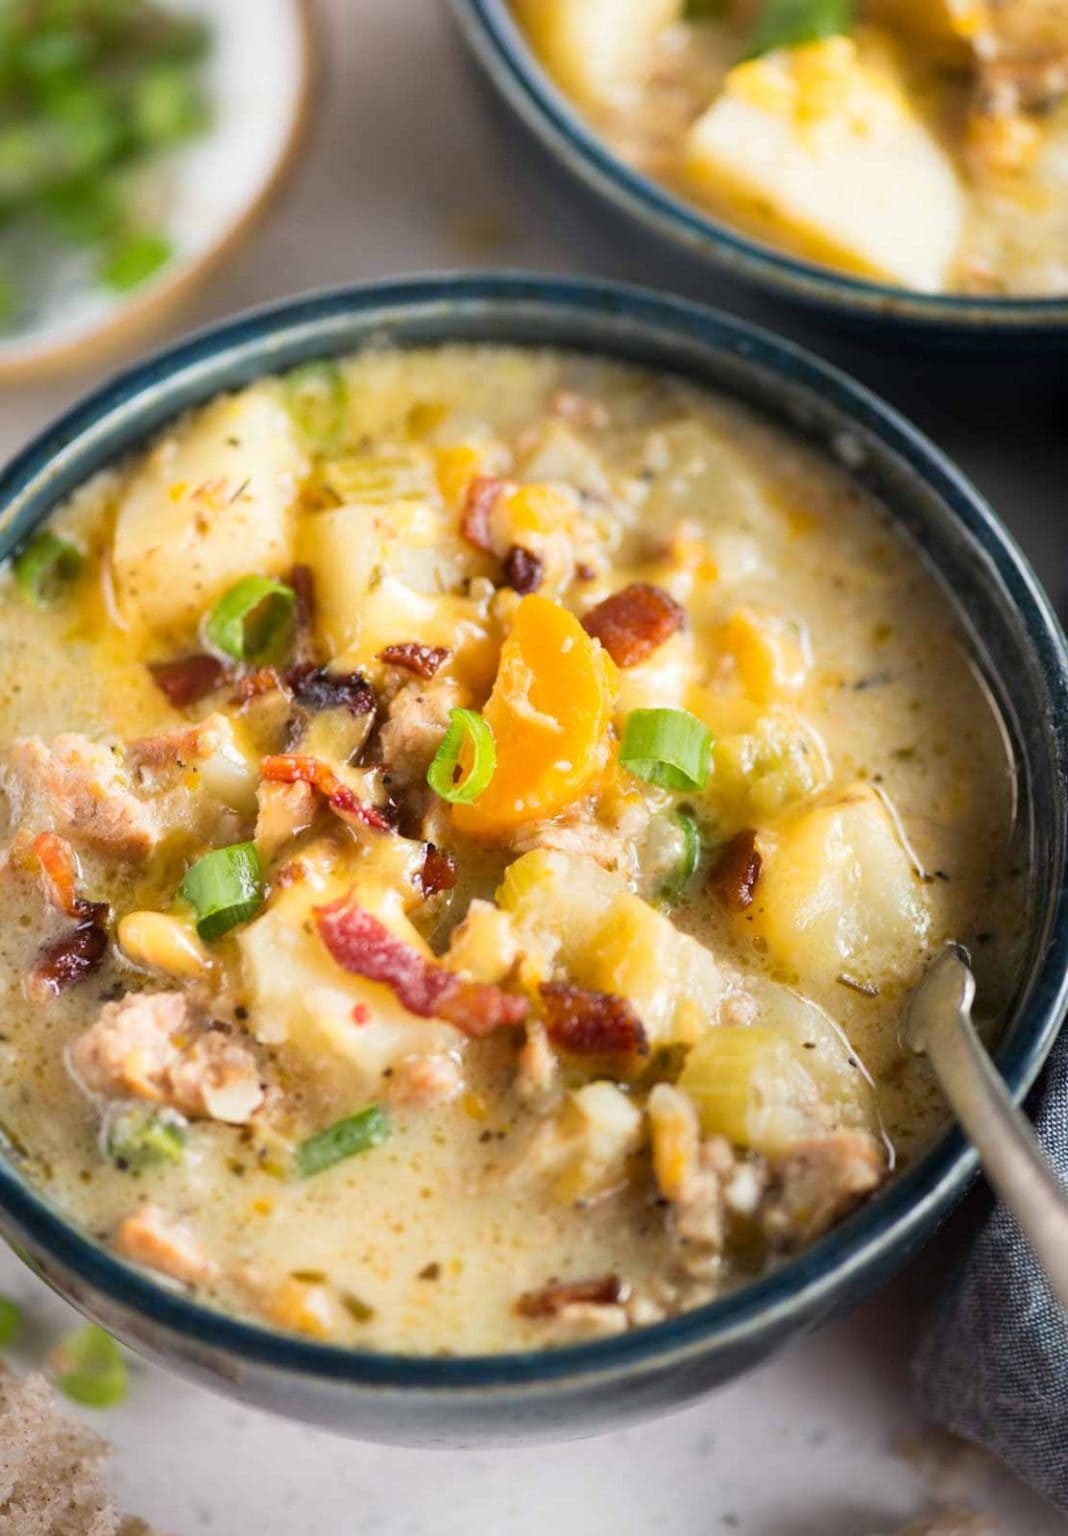 Instant Pot Potato Soup With Sausage - The flavours of kitchen